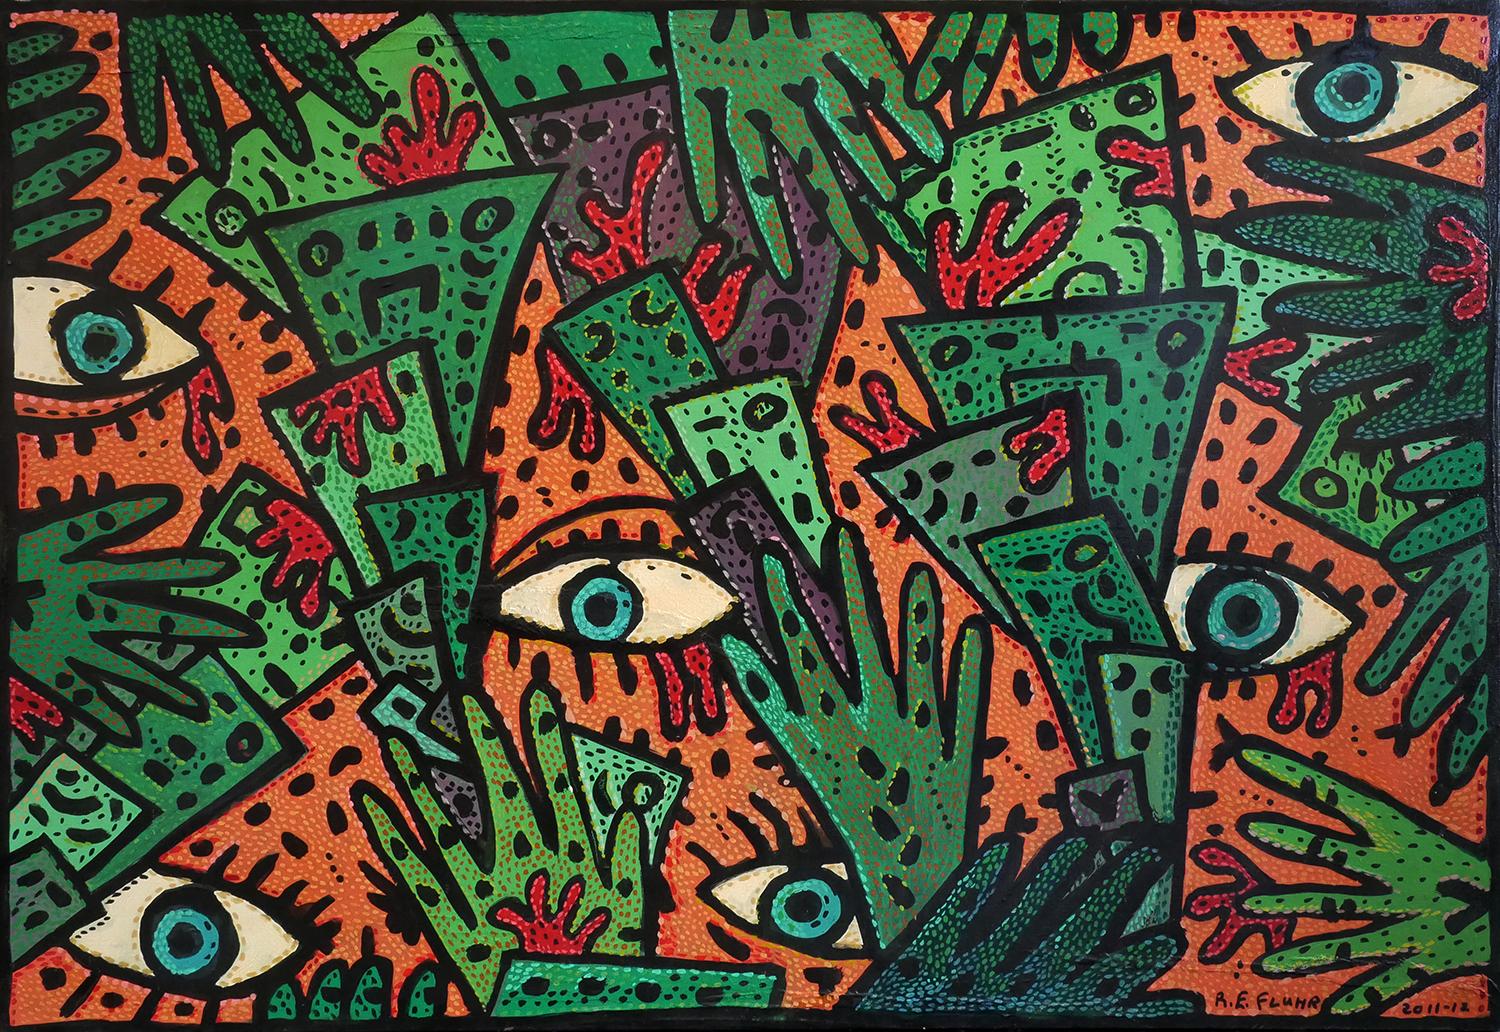 Richard Fluhr Abstract Painting - “Bloody Money?” Orange, Green, and Brown Abstract Contemporary Painting